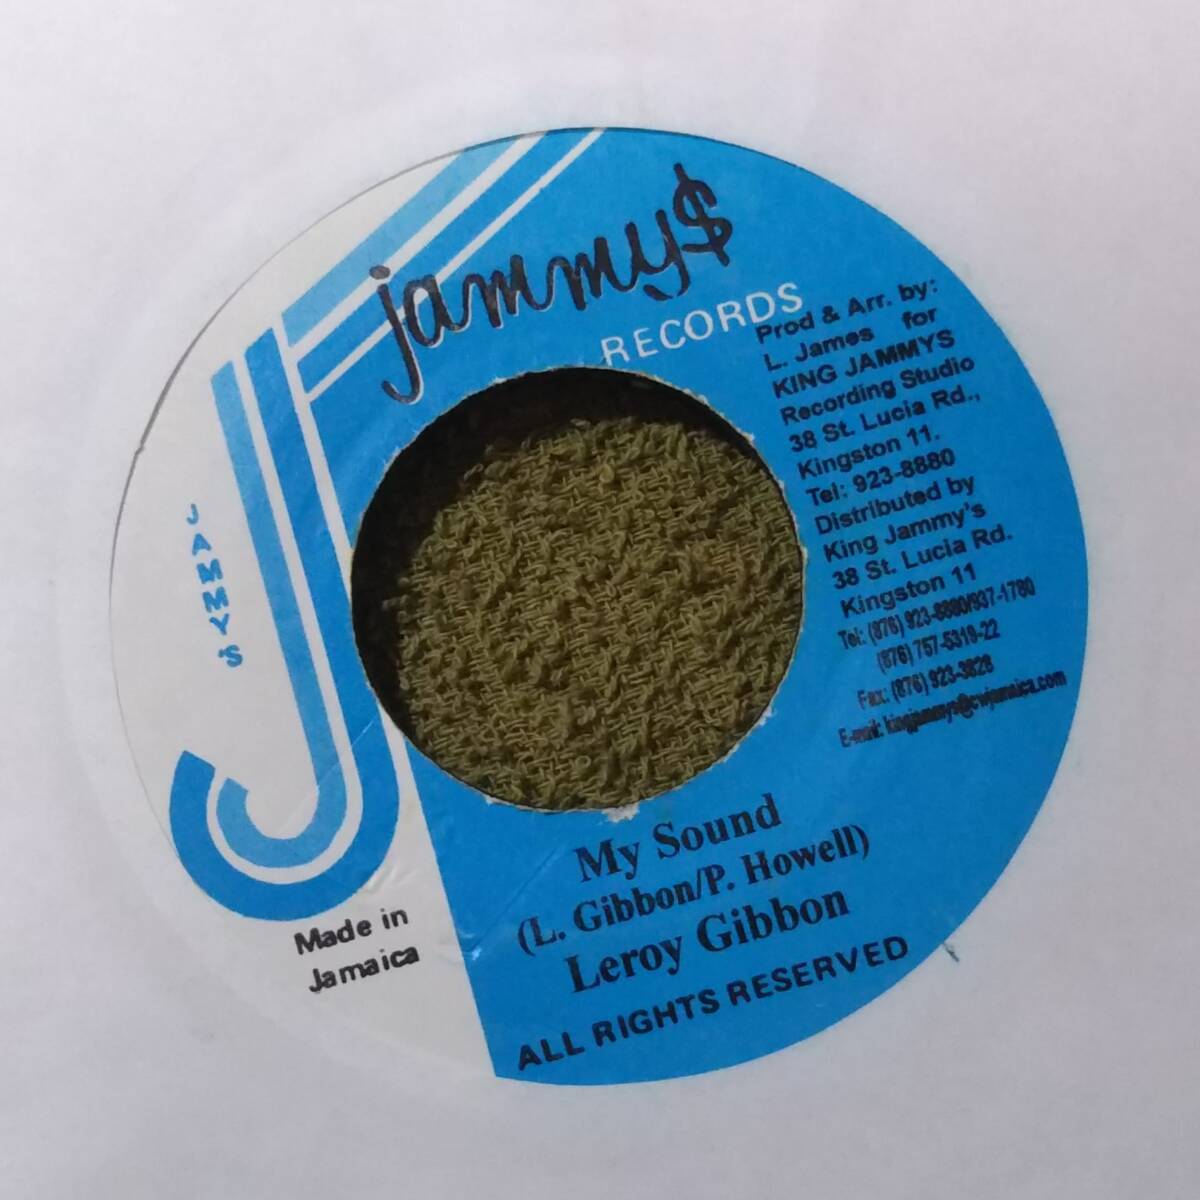 China Town Riddim My Sound Leroy Gibbons from Jammys_画像1